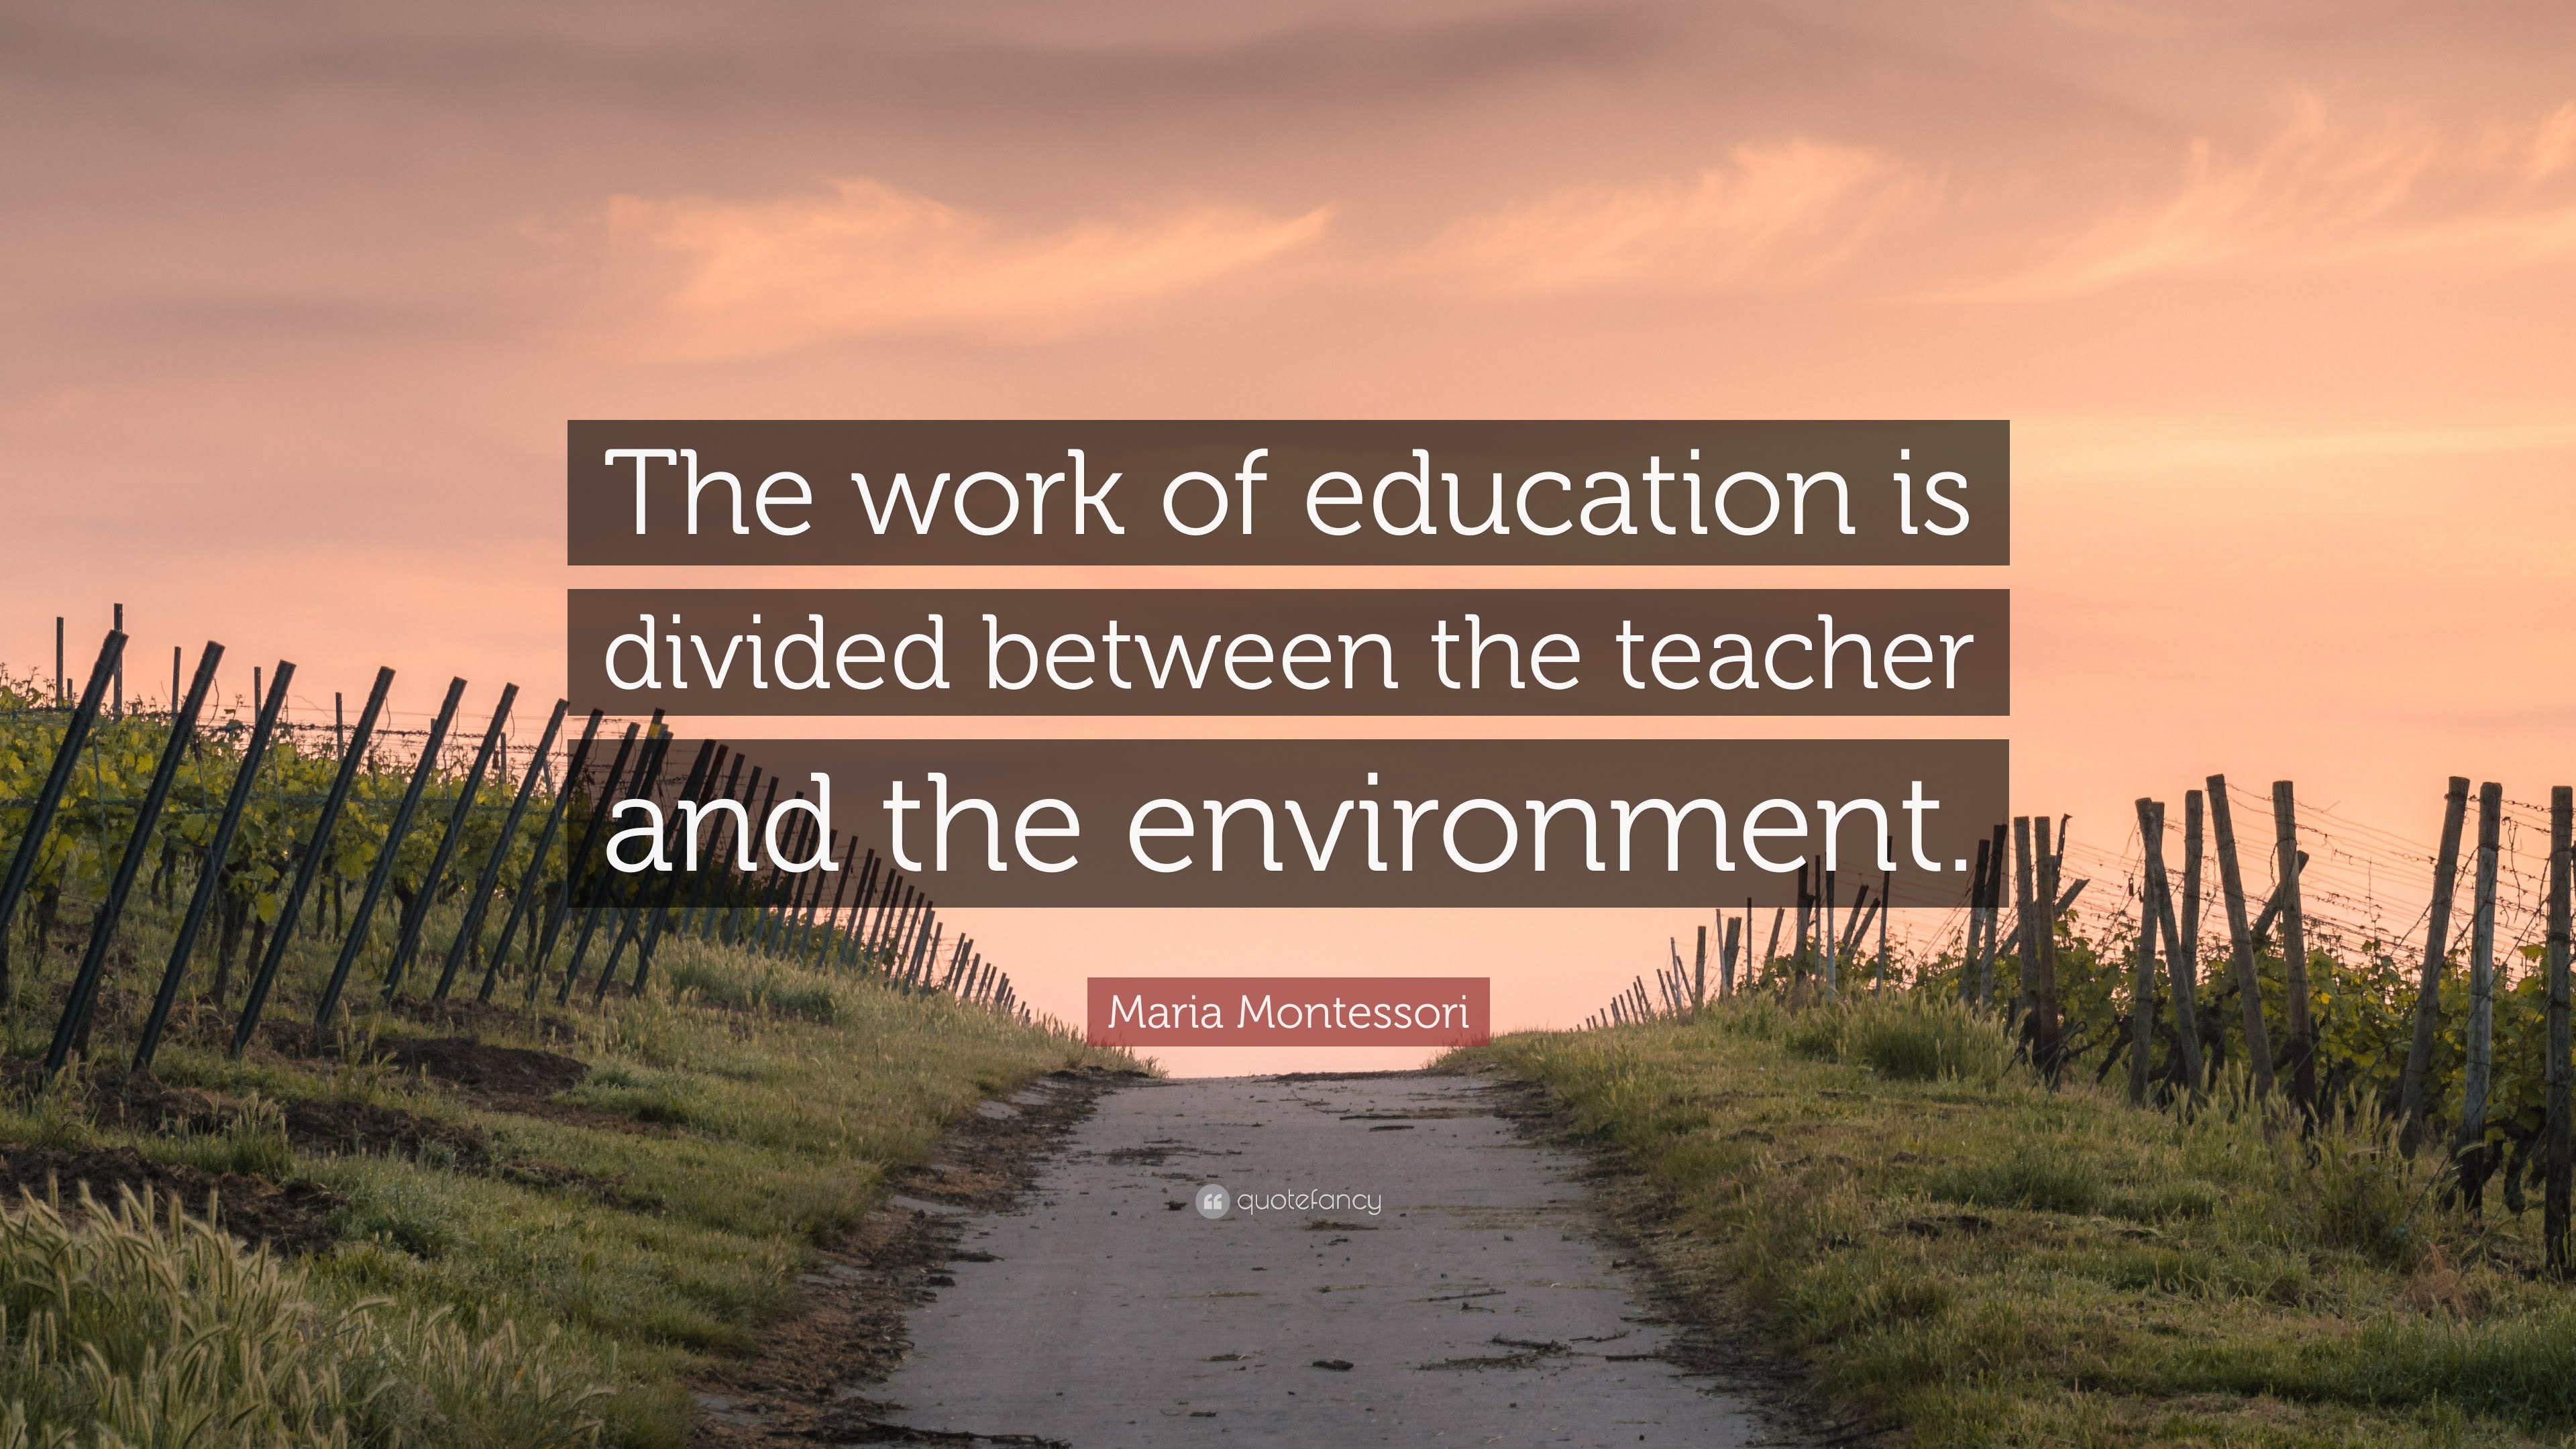 Maria Montessori Quote: “The work of education is divided between the